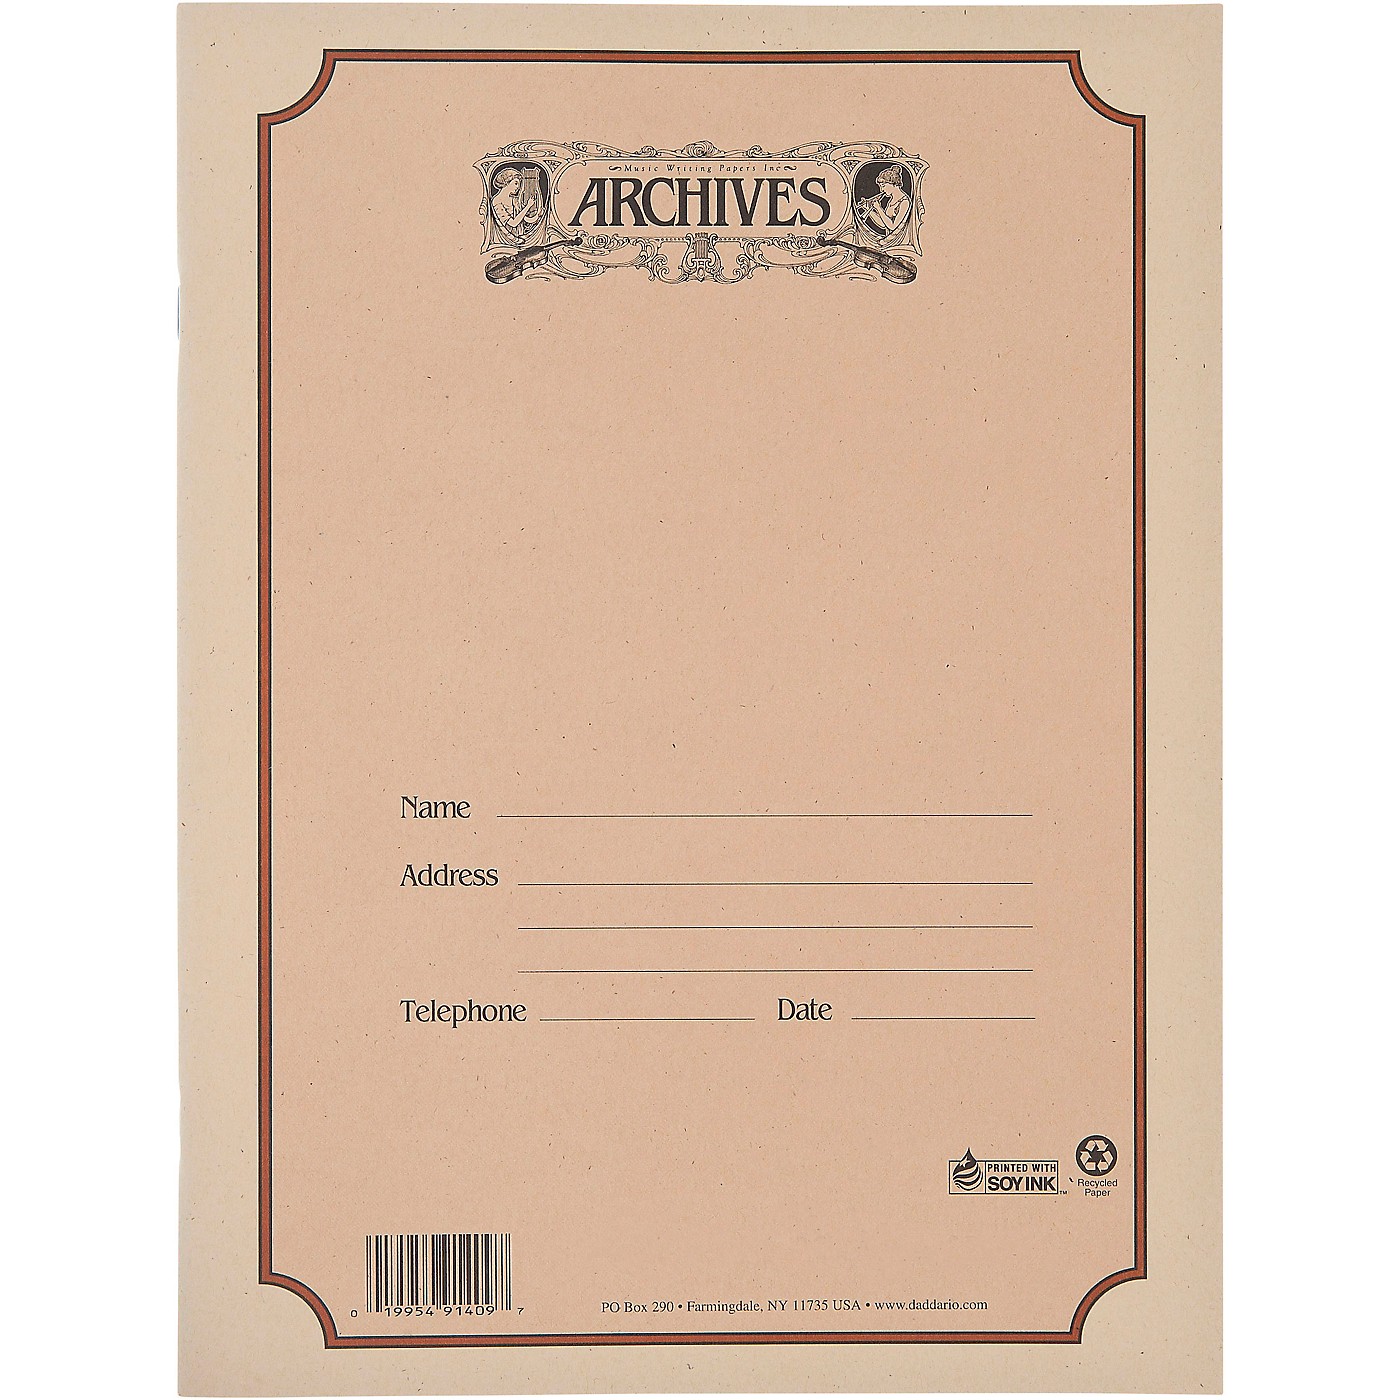 Archives Spiral Bound Manuscript Paper 10 Staves, 96 Pages thumbnail